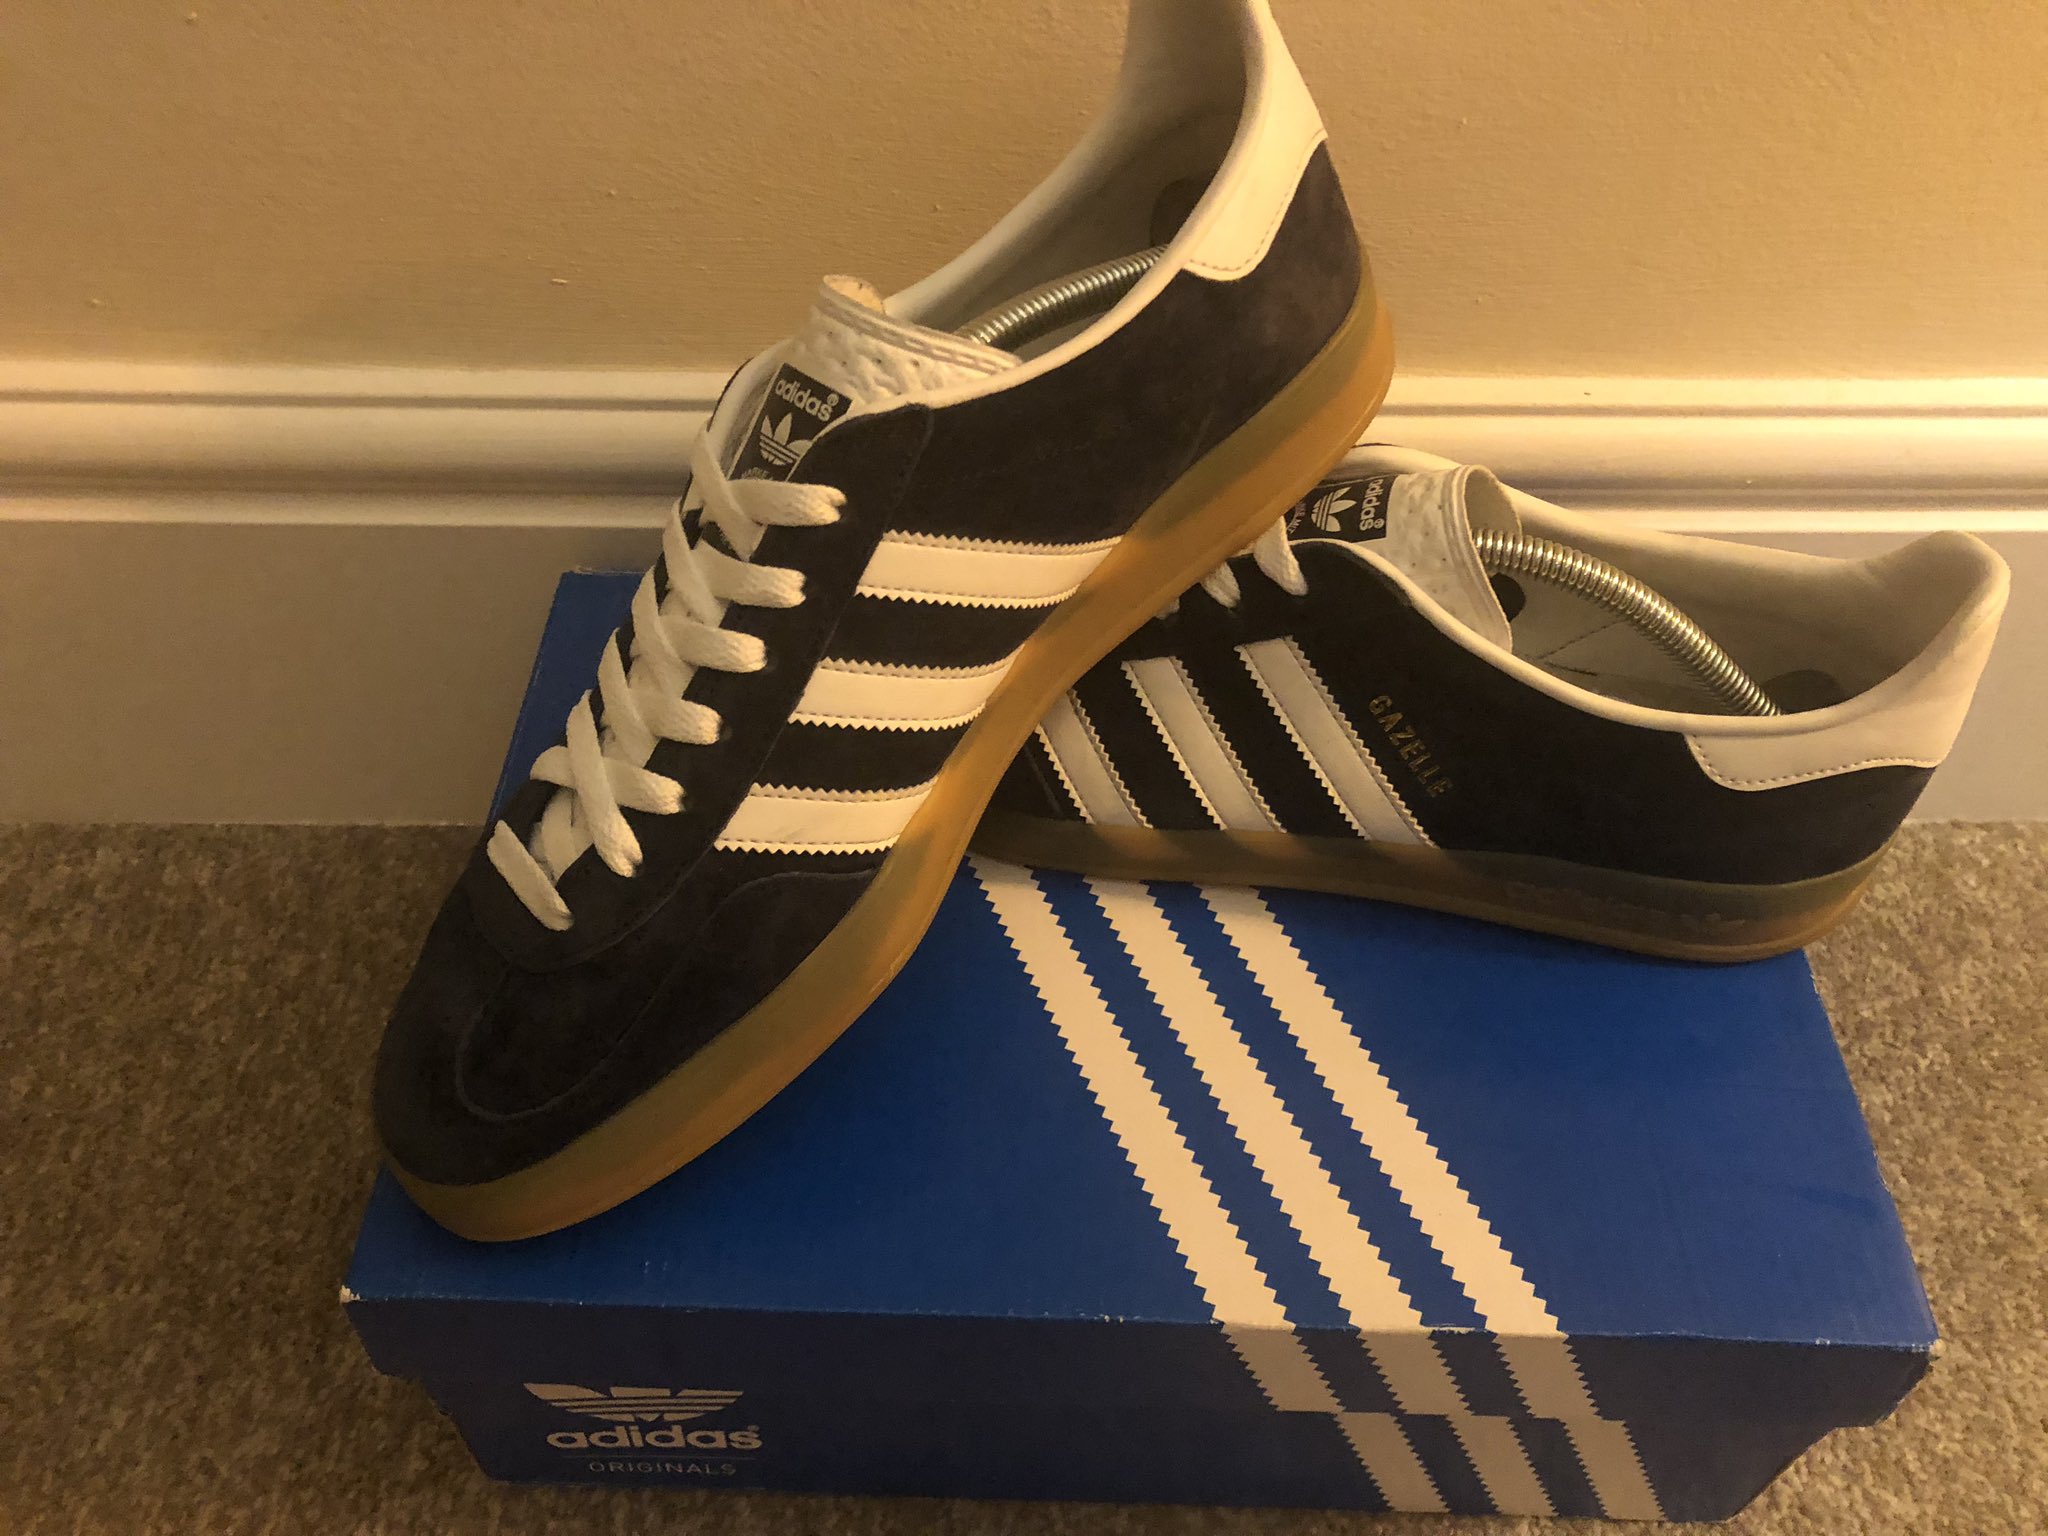 Indie on Twitter: "Gazelle Indoor with new white laces /// #Gazelles # Adidas https://t.co/Rw5FHUqbUz" / Twitter